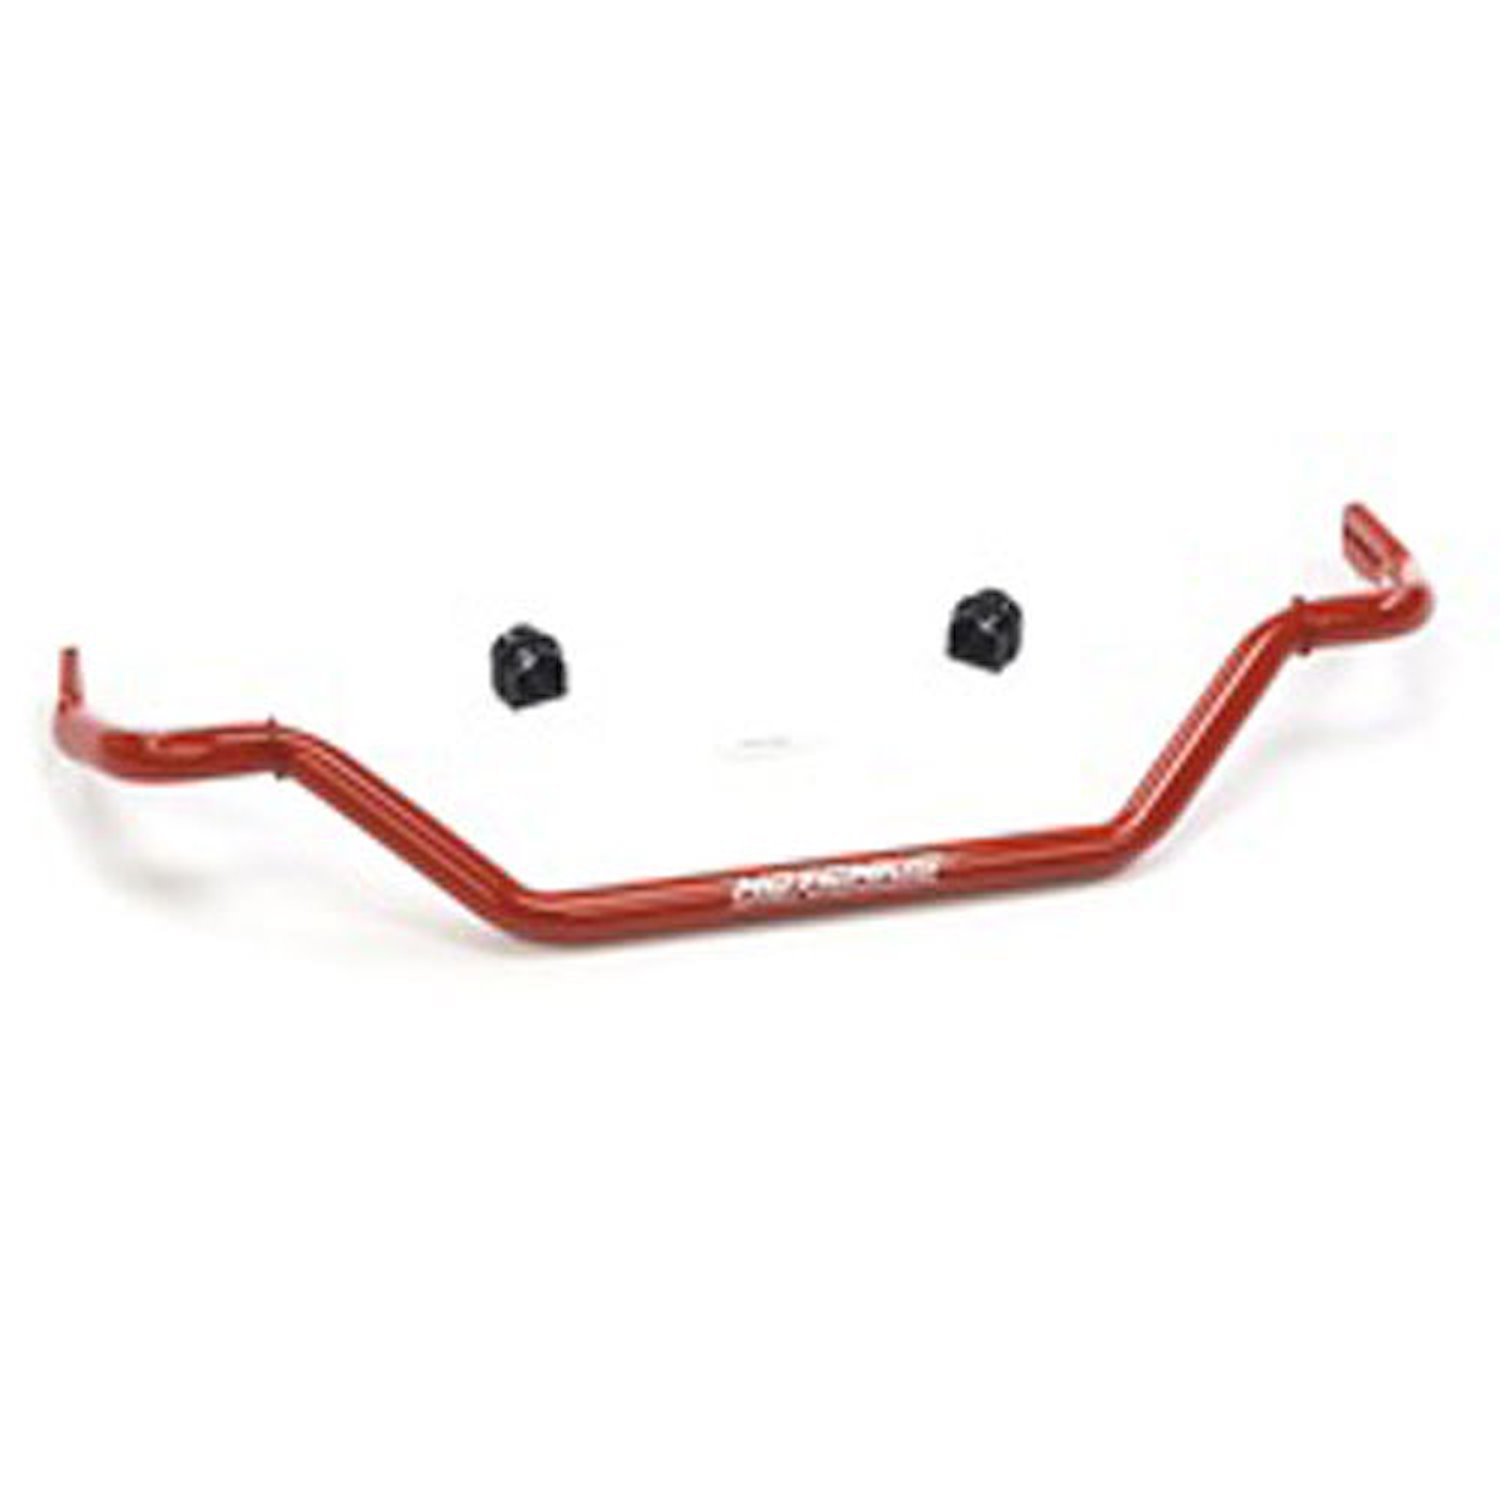 Front Sway Bar 2003-2007 for Nissan 350z, Infiniti